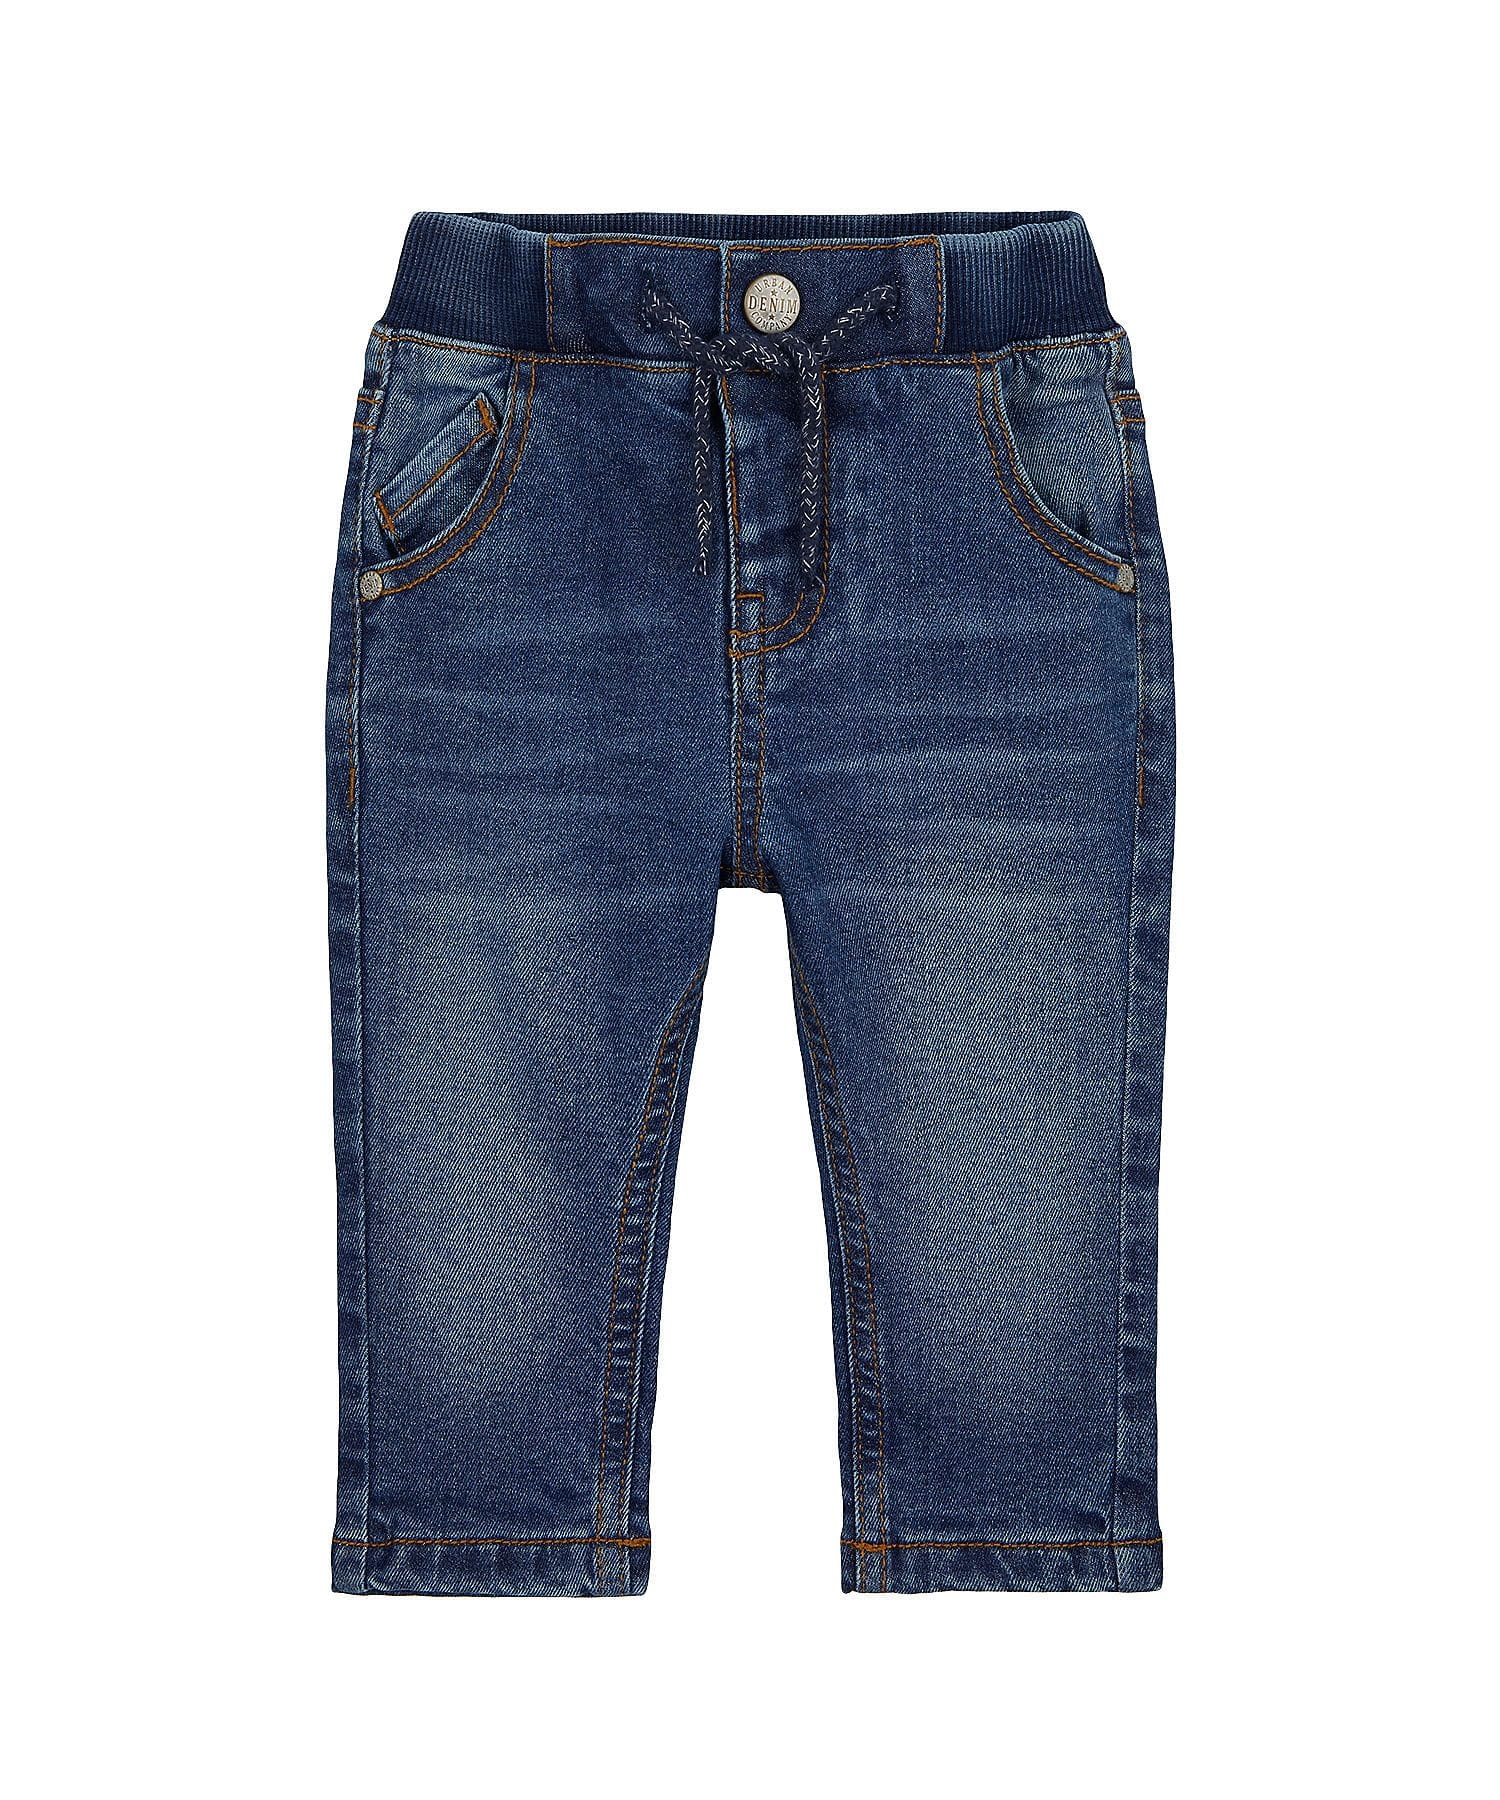 Mothercare | Boys Mid-Wash Jeans Jersey Lined - Blue 0